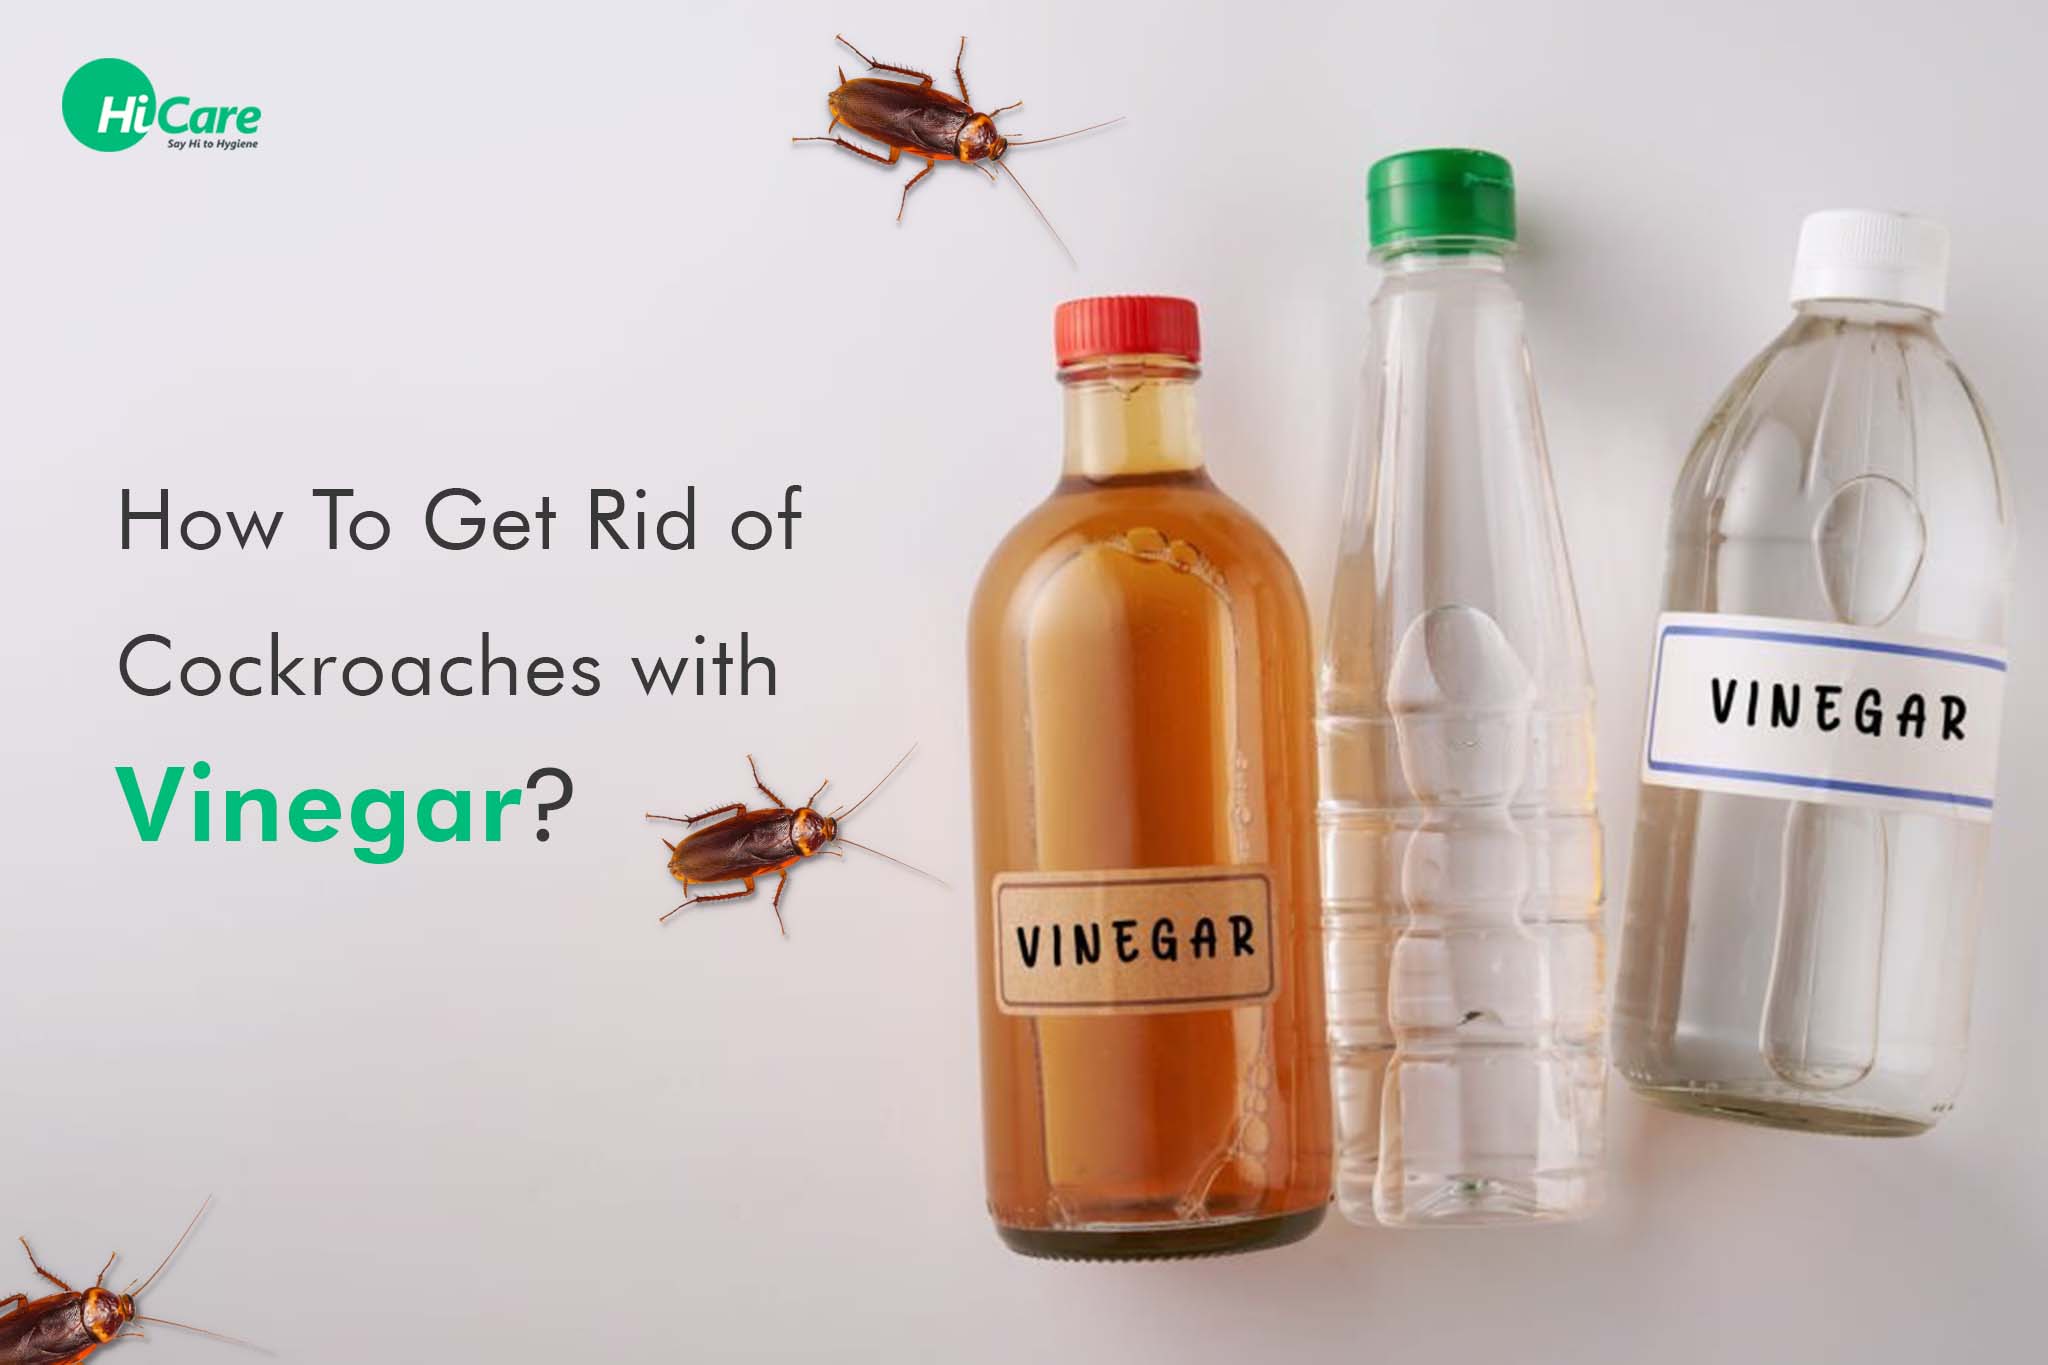 How To Get Rid of Cockroaches with Vinegar?